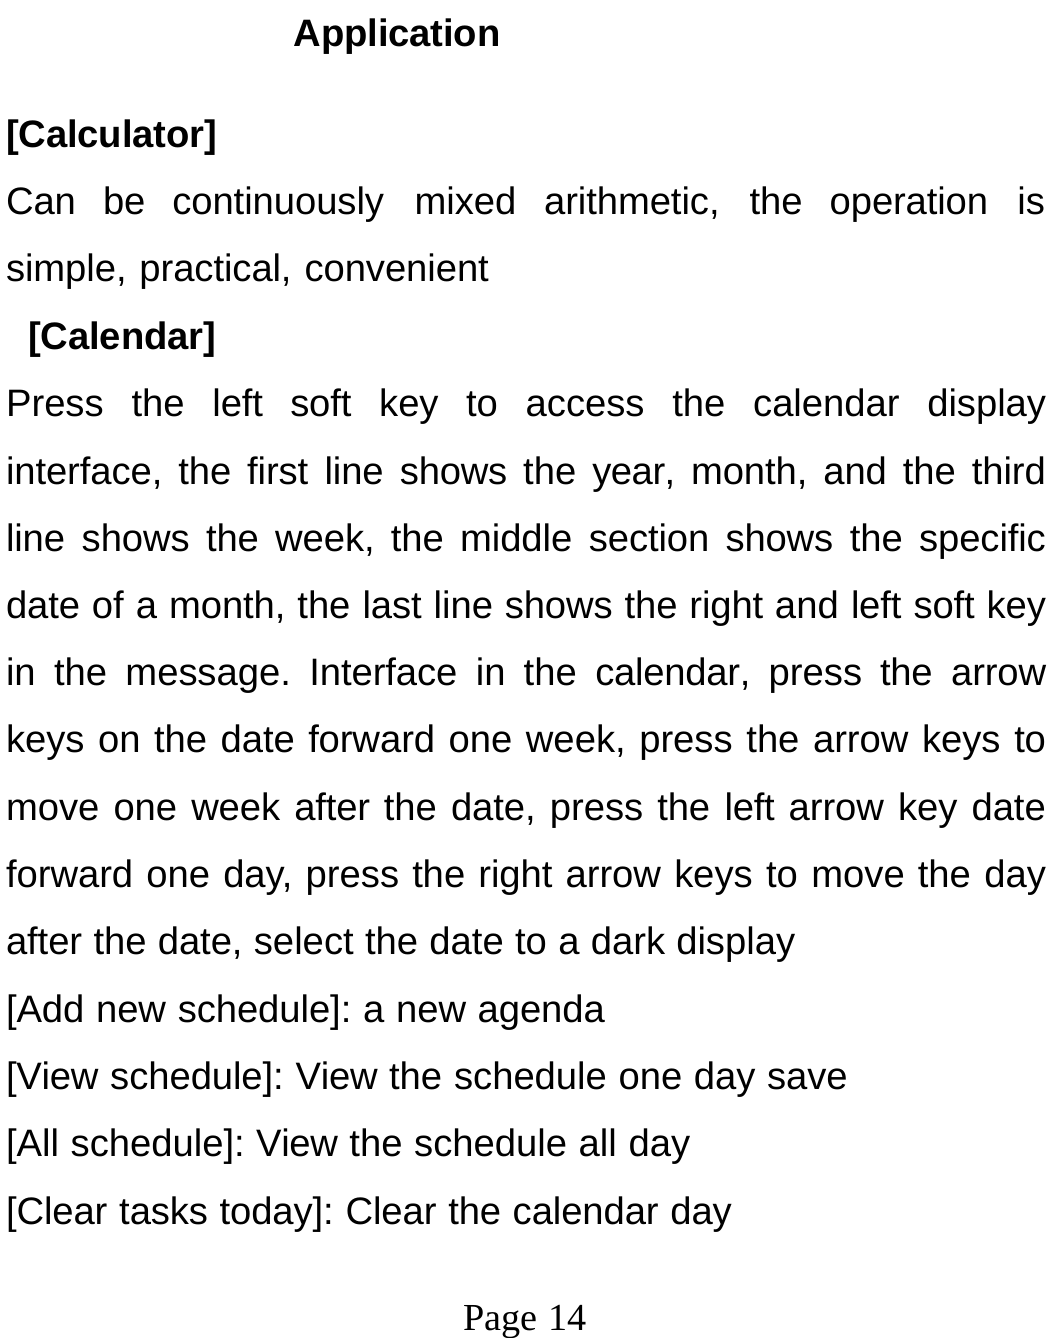 Page 14Application [Calculator] Can be continuously mixed arithmetic, the operation is simple, practical, convenient [Calendar] Press the left soft key to access the calendar display interface, the first line shows the year, month, and the third line shows the week, the middle section shows the specific date of a month, the last line shows the right and left soft key in the message. Interface in the calendar, press the arrow keys on the date forward one week, press the arrow keys to move one week after the date, press the left arrow key date forward one day, press the right arrow keys to move the day after the date, select the date to a dark display [Add new schedule]: a new agenda [View schedule]: View the schedule one day save [All schedule]: View the schedule all day [Clear tasks today]: Clear the calendar day 